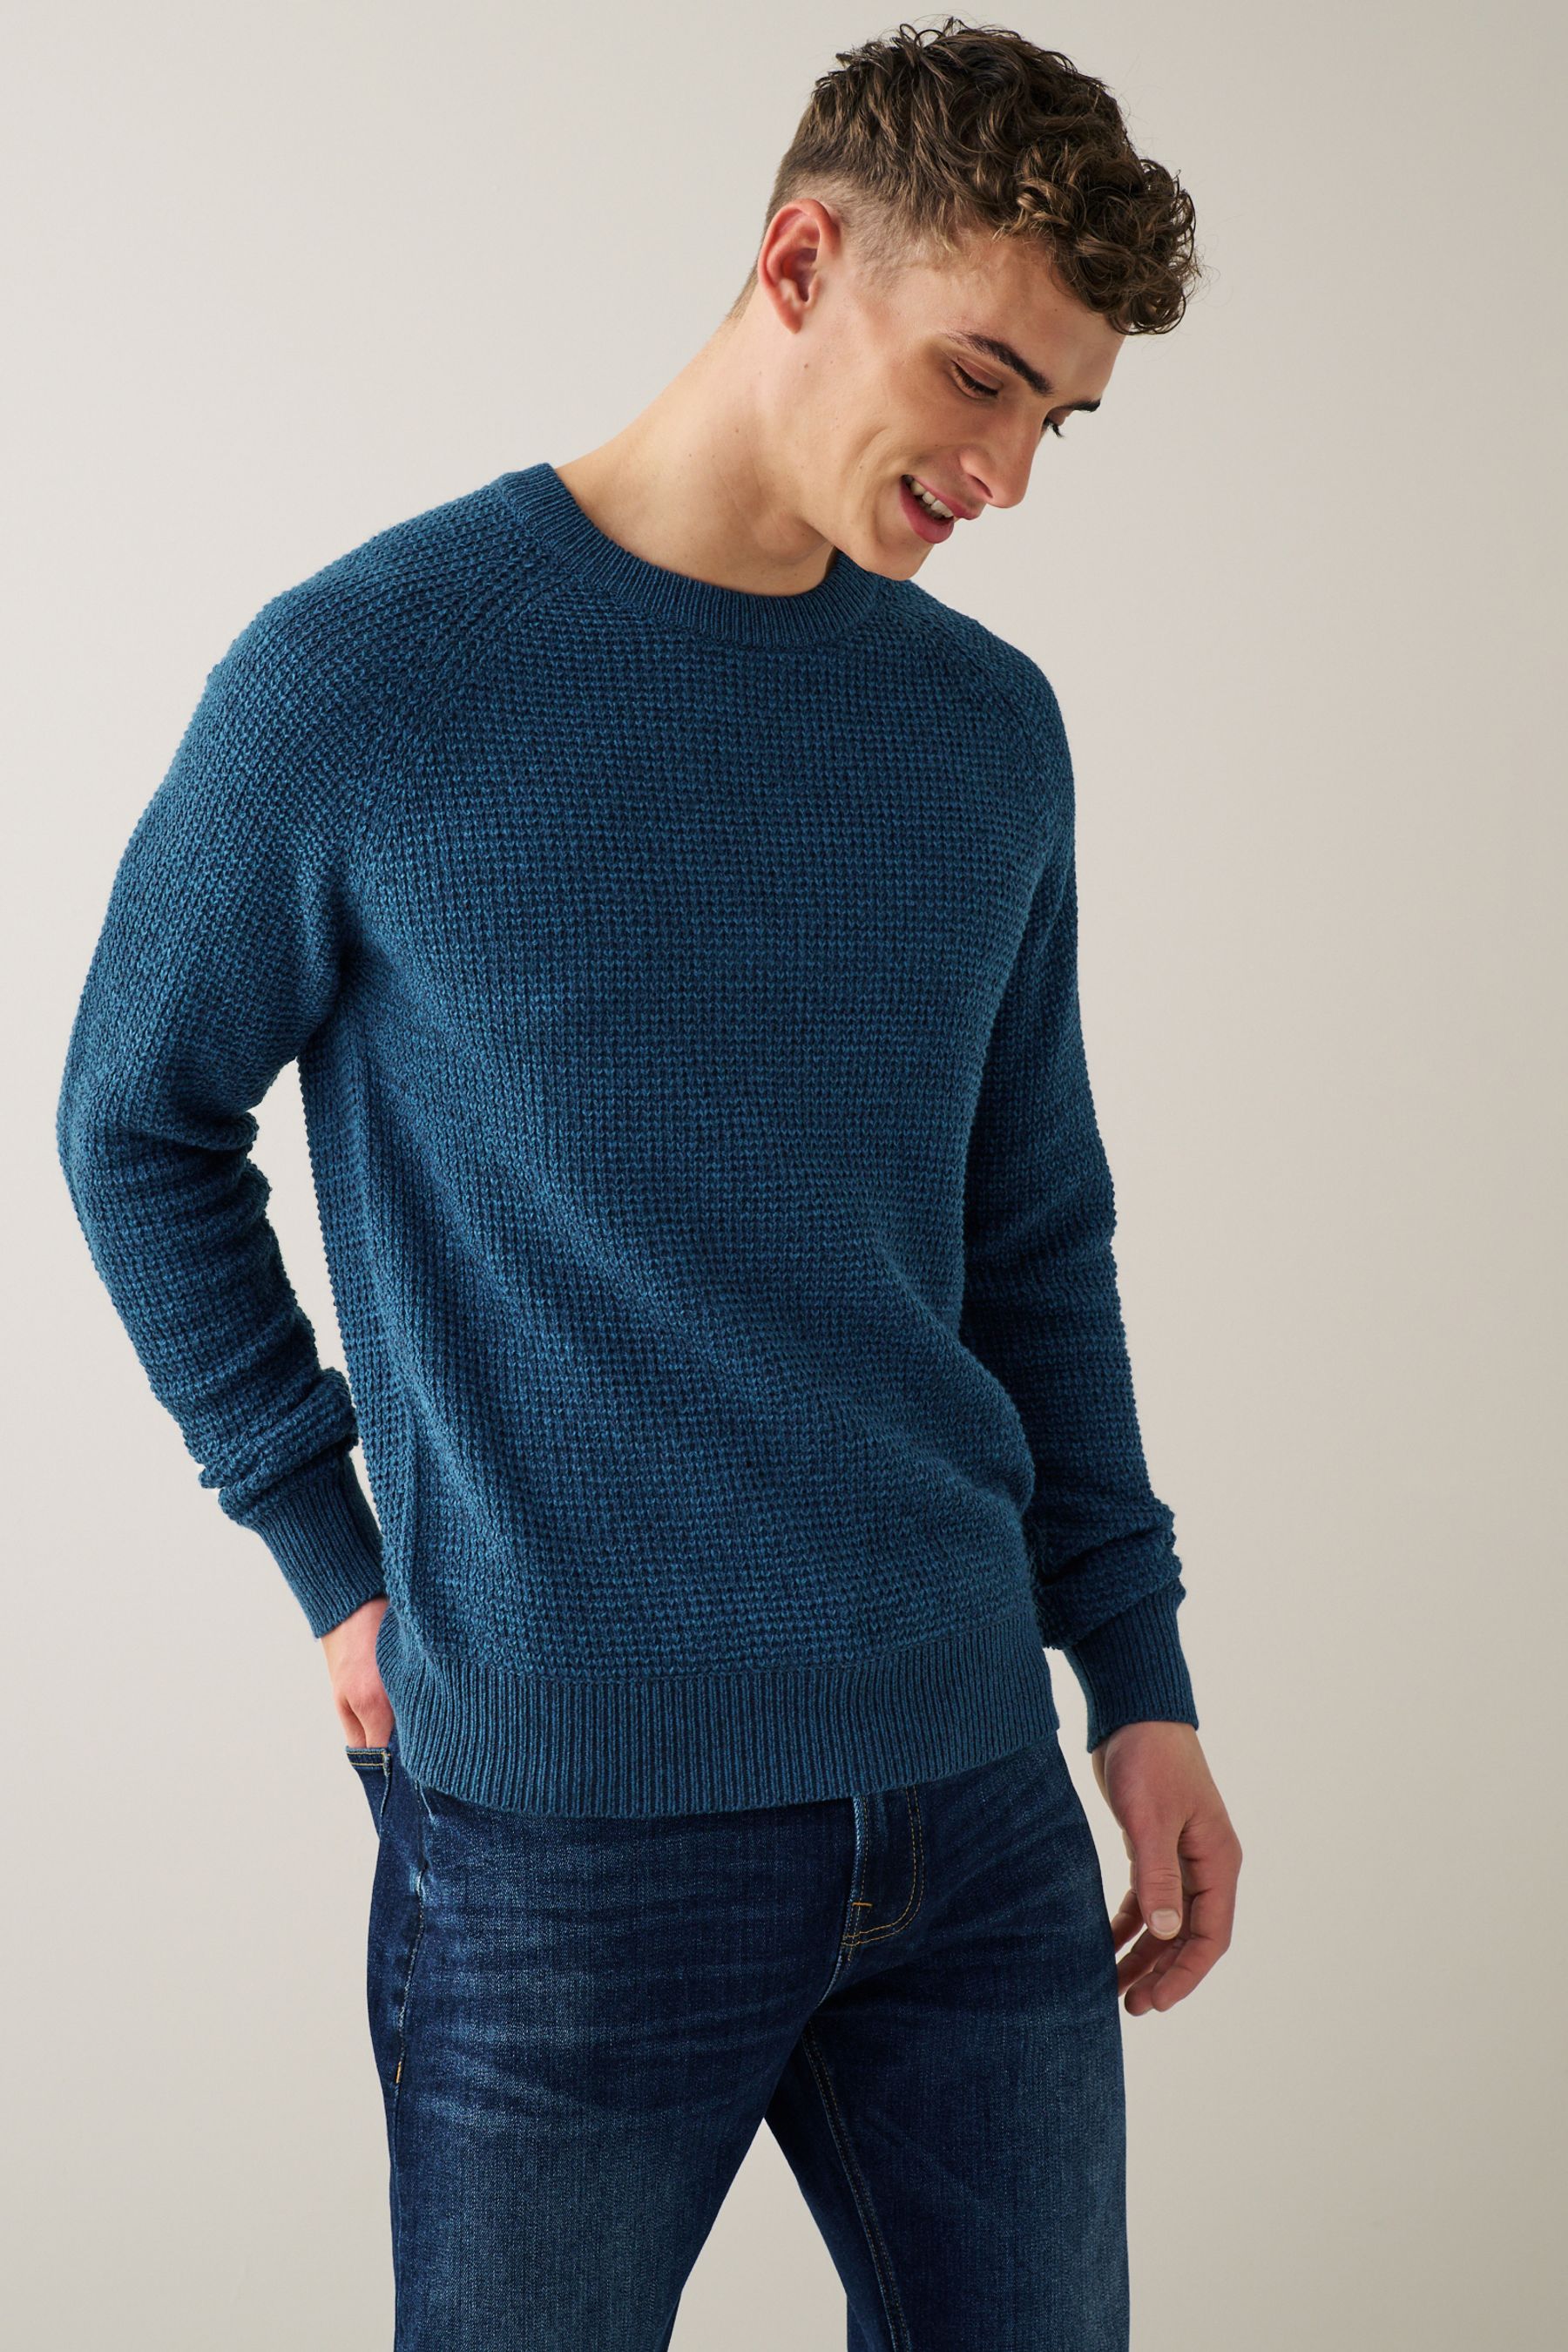 Buy Textured Knitted Jumper from Next Ireland